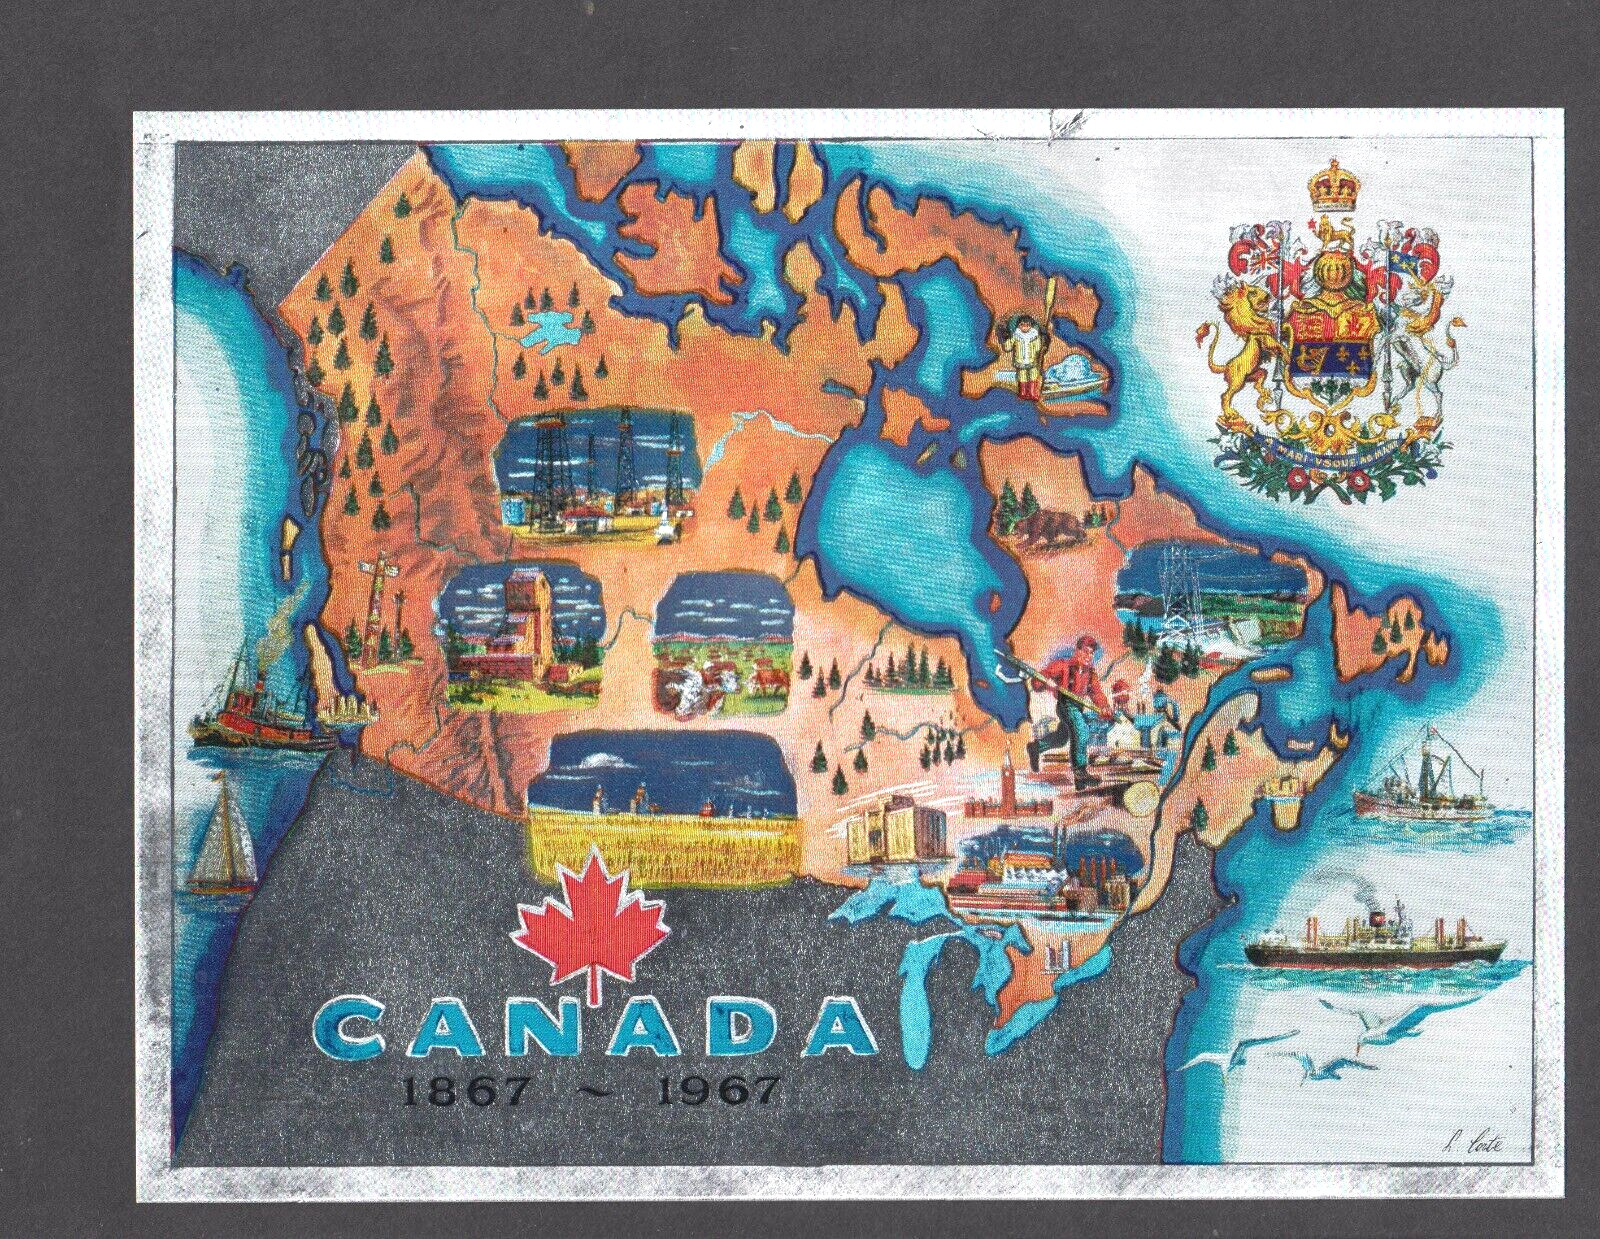 CANADA 1867-1967 LOVELY L. CORTE COLOR MAP ON SILVER BACK-GROUND